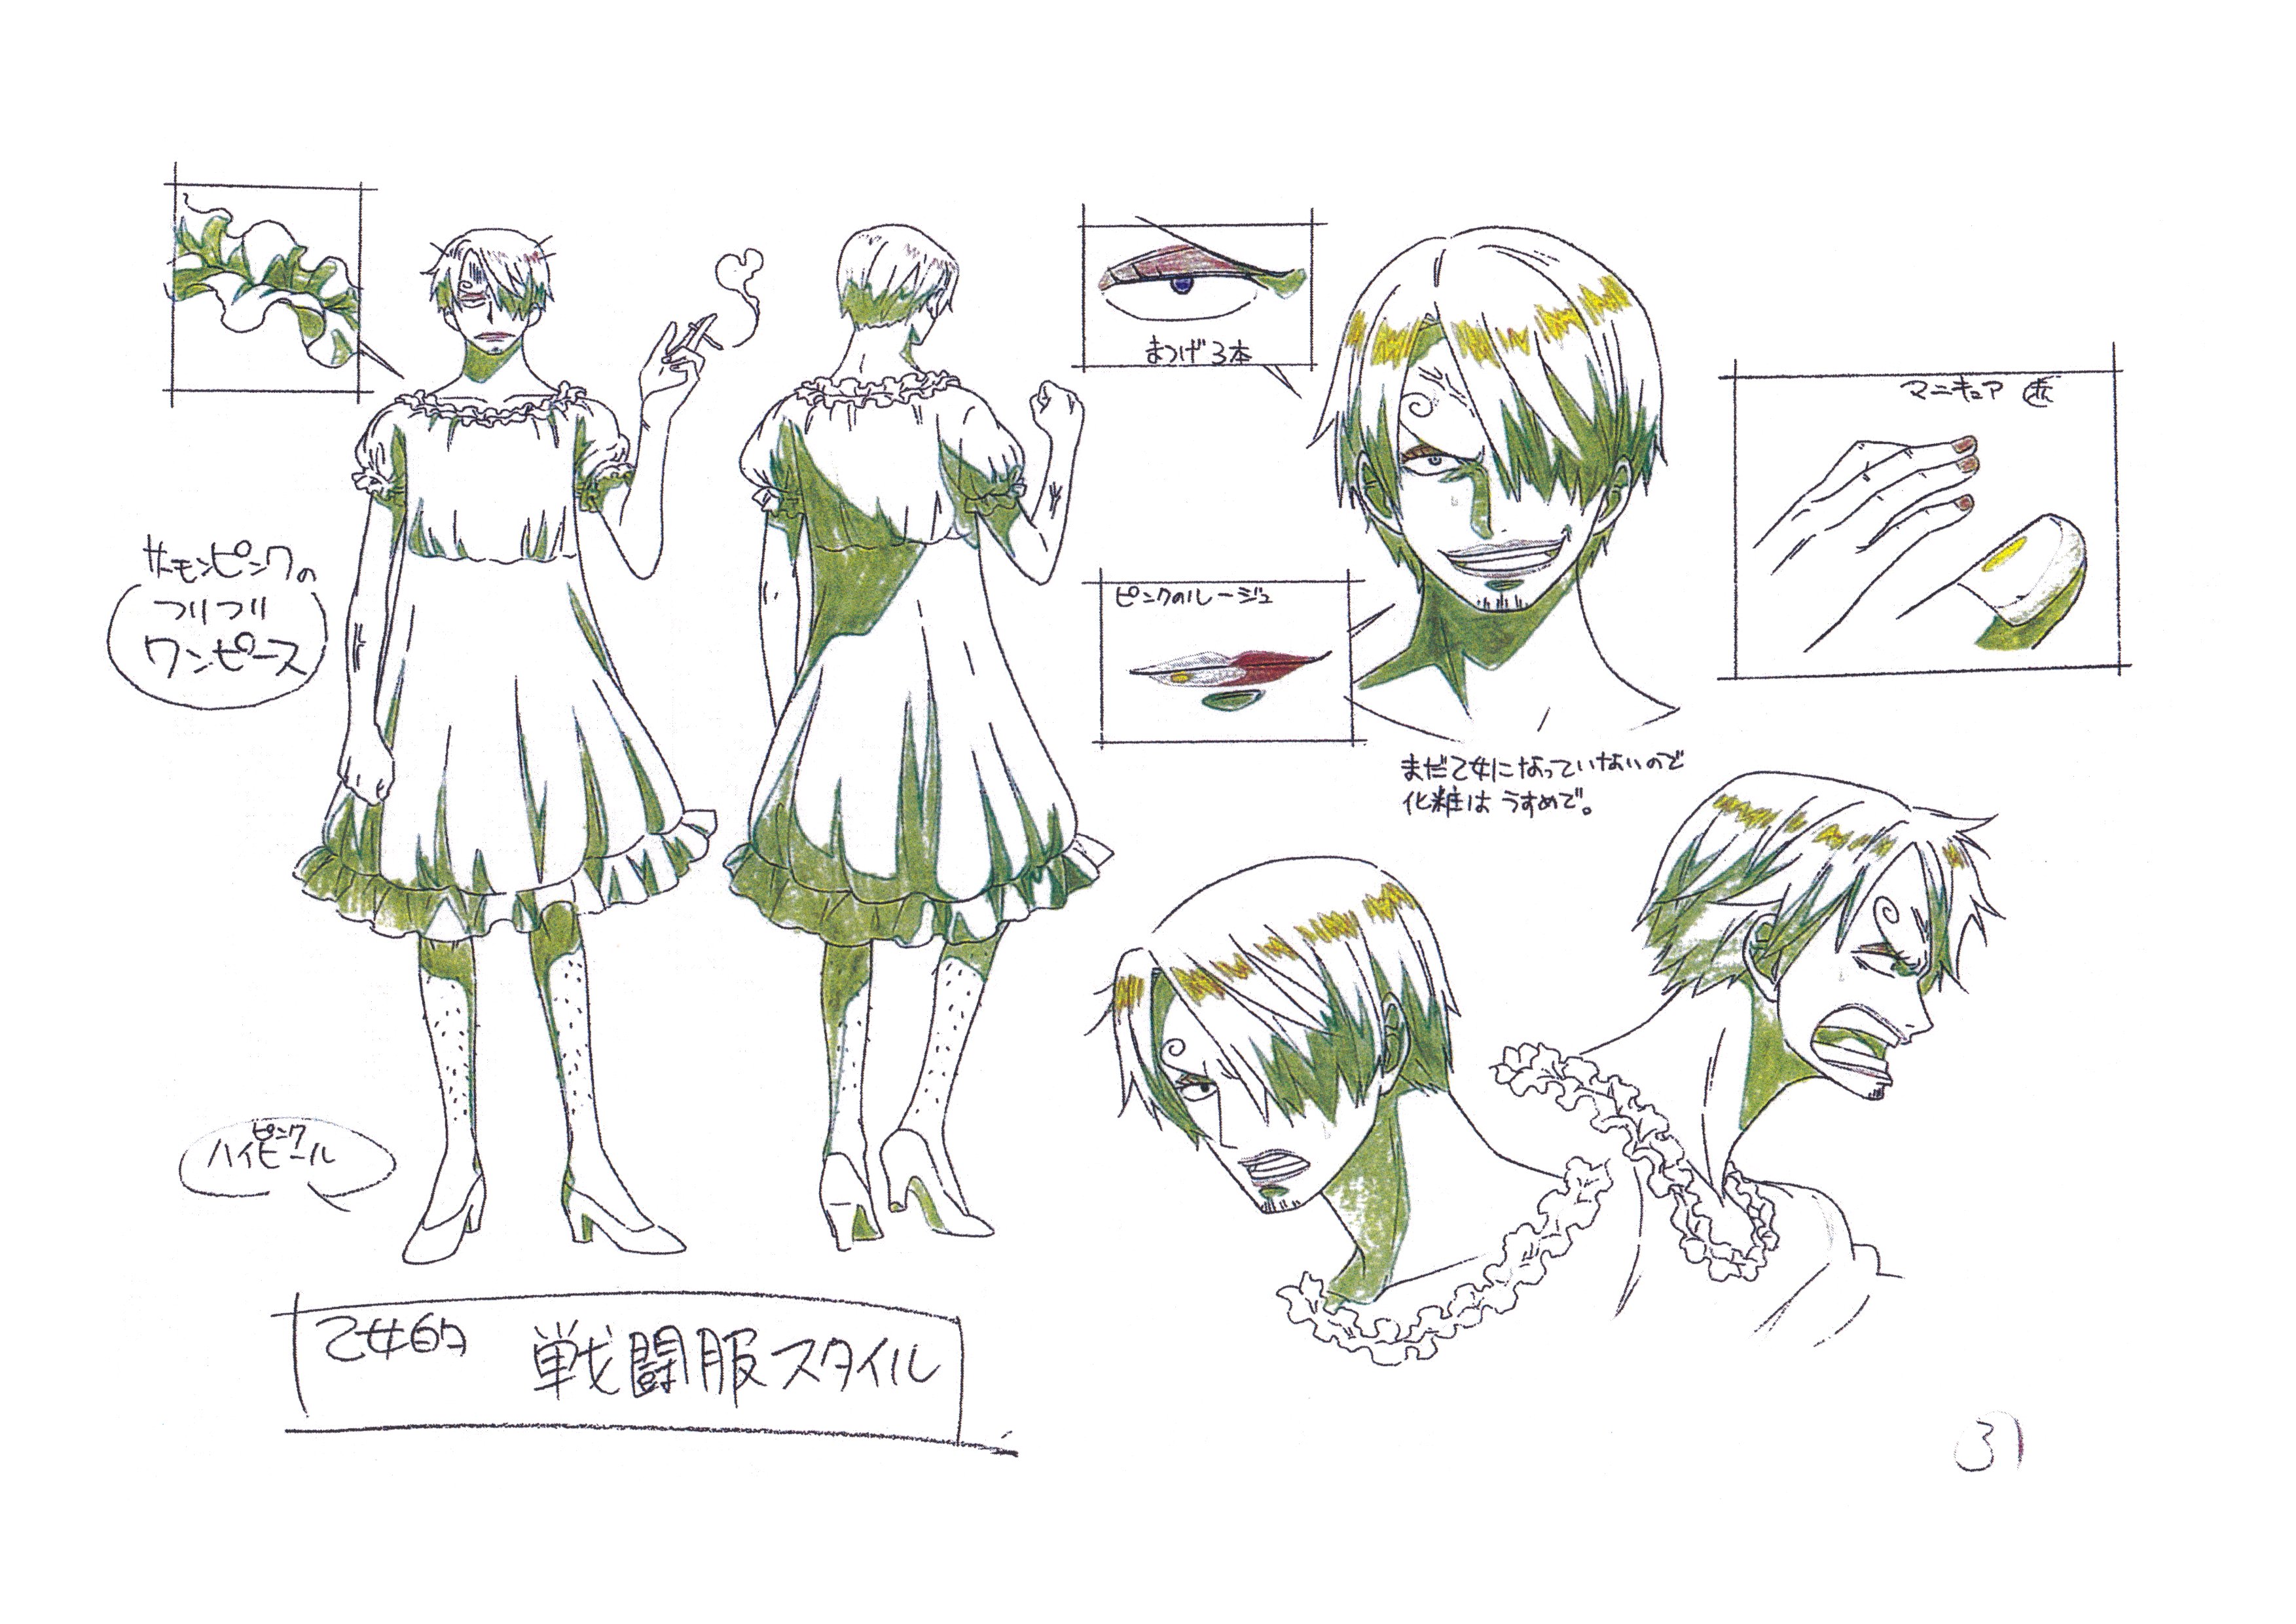 Settei Dreams on X: One Piece: Heart of Gold (22 sheets) is now available  in the WIP (Patreon) section. #OnePiece #OnePieceHeartOfGold #settei  #modelsheets #anime #animation #art  / X